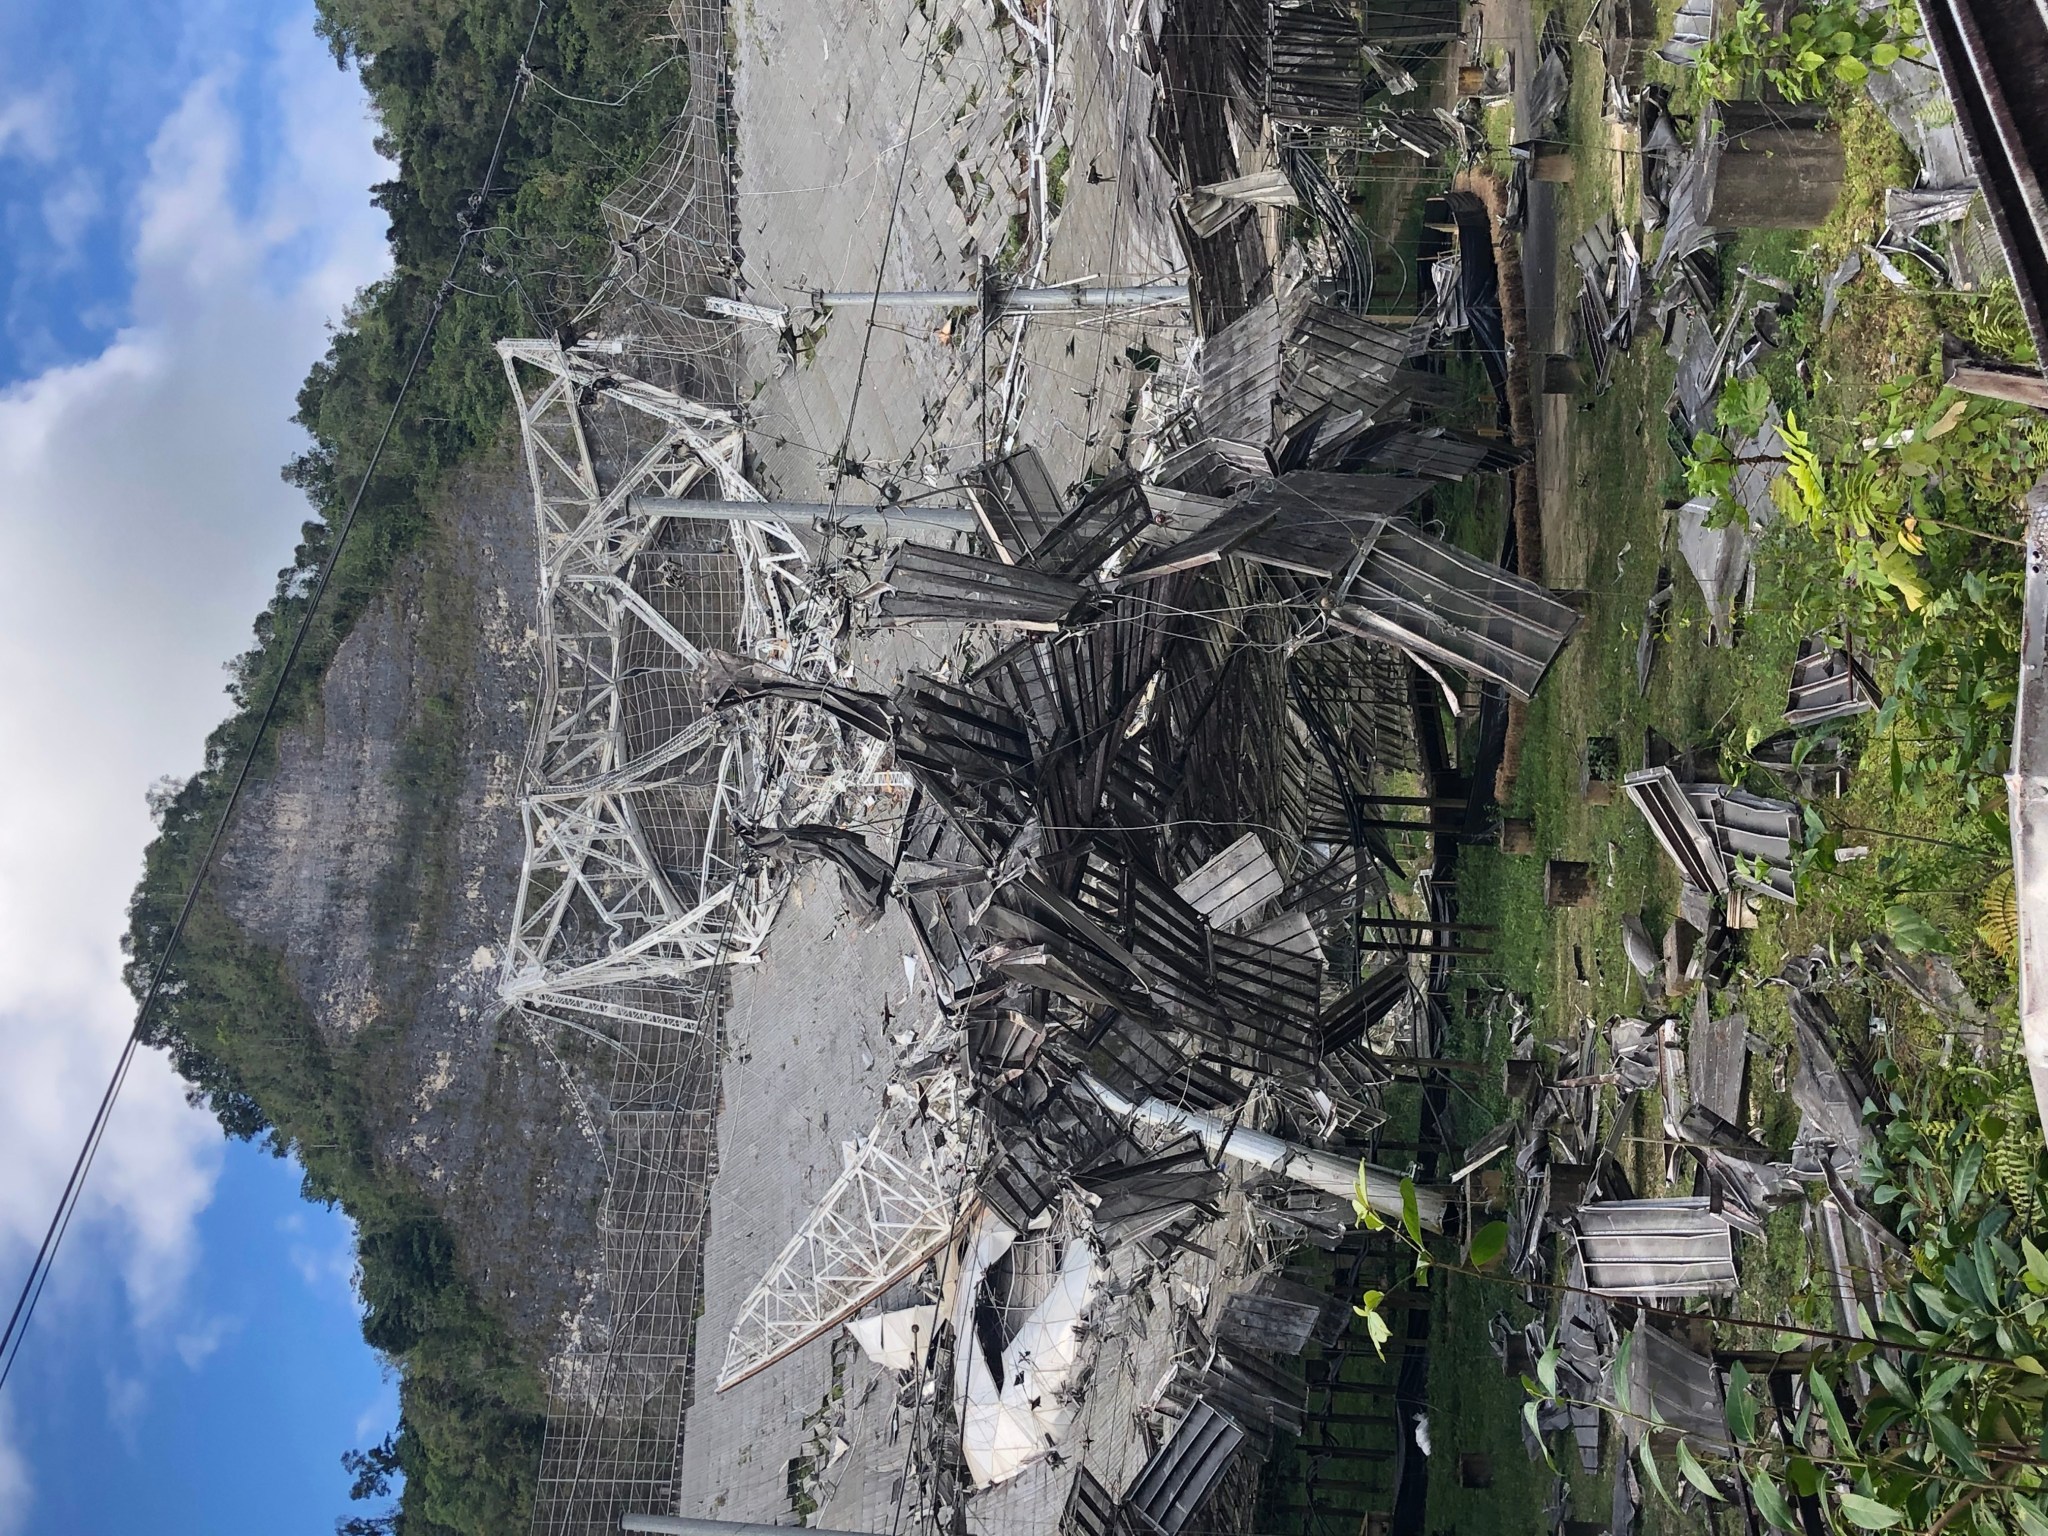 Damage to the 305-meter telescope at Arecibo Observatory in Puerto Rico, after its collapse on Dec. 1, 2020. The remains of the instrument platform are visible on the telescope’s dish. 